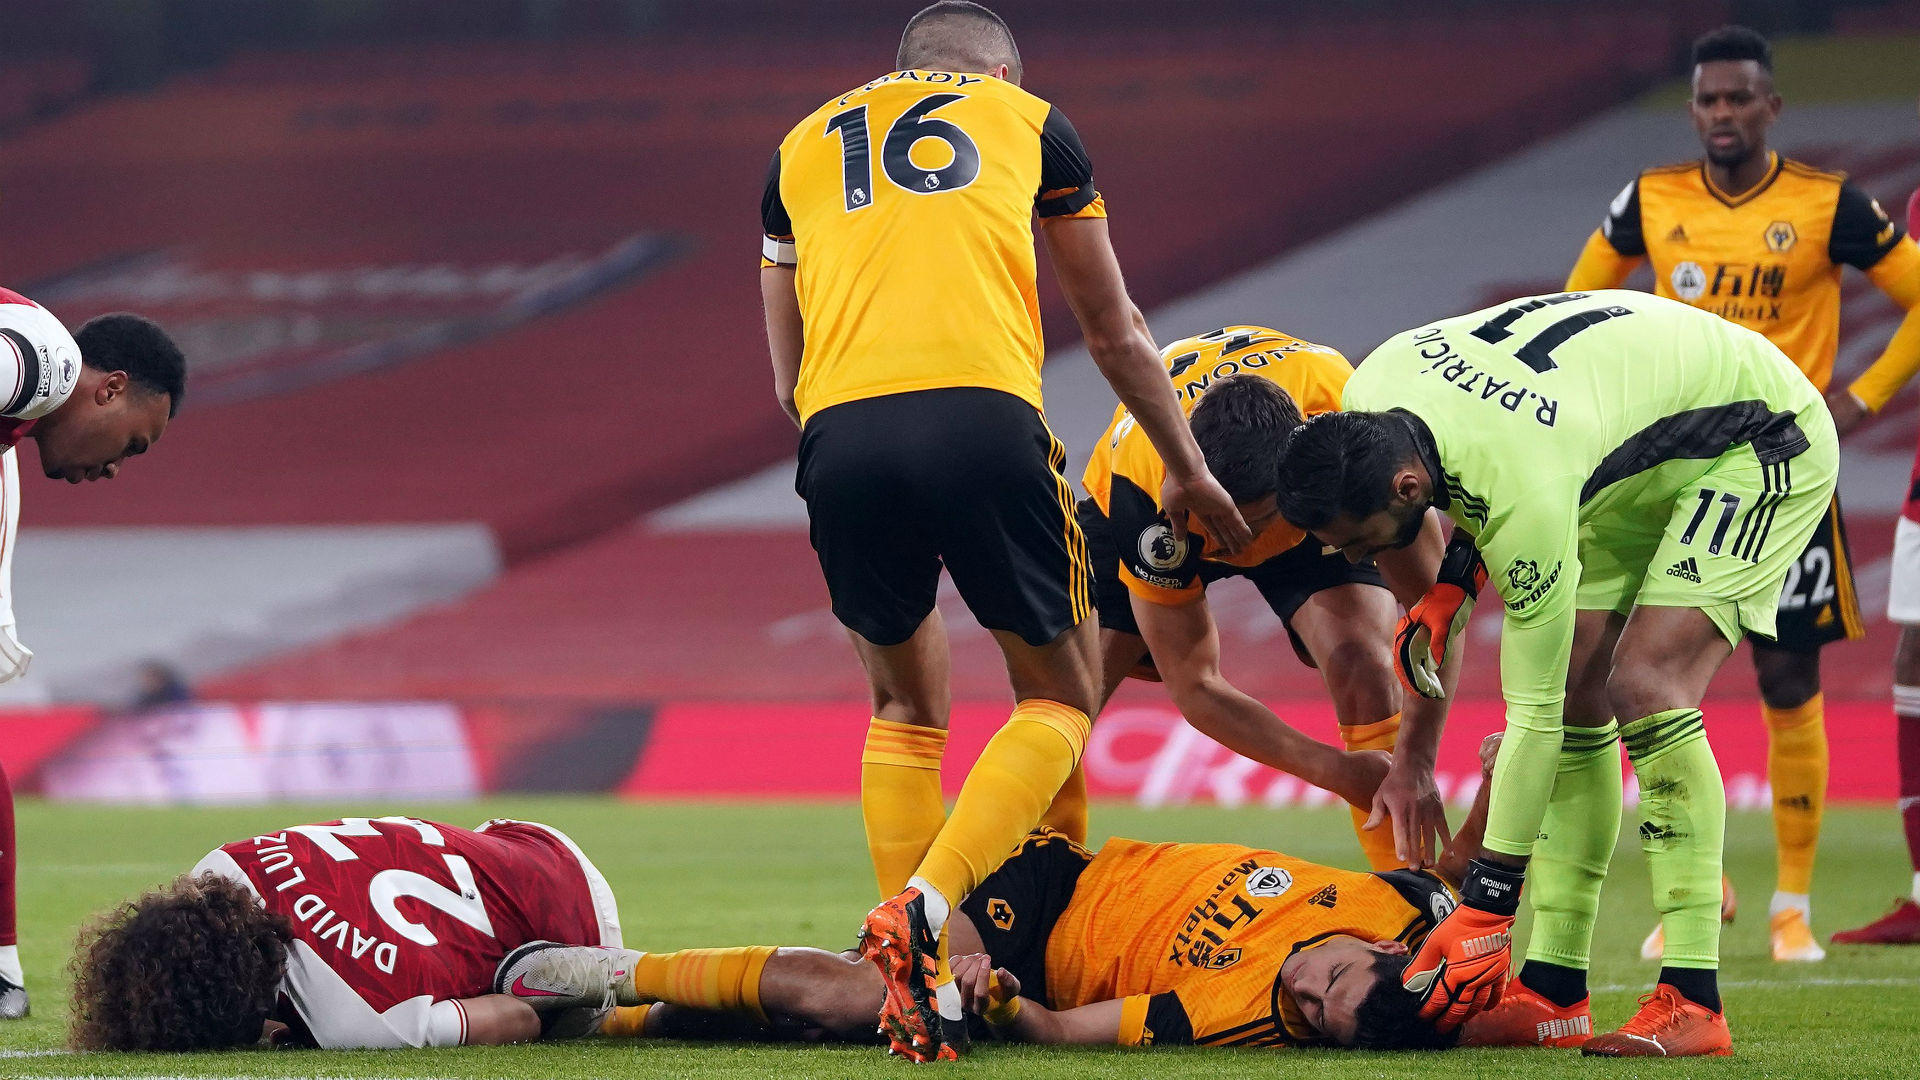 Premier League agree concussion substitutes trial but with no start date yet announced